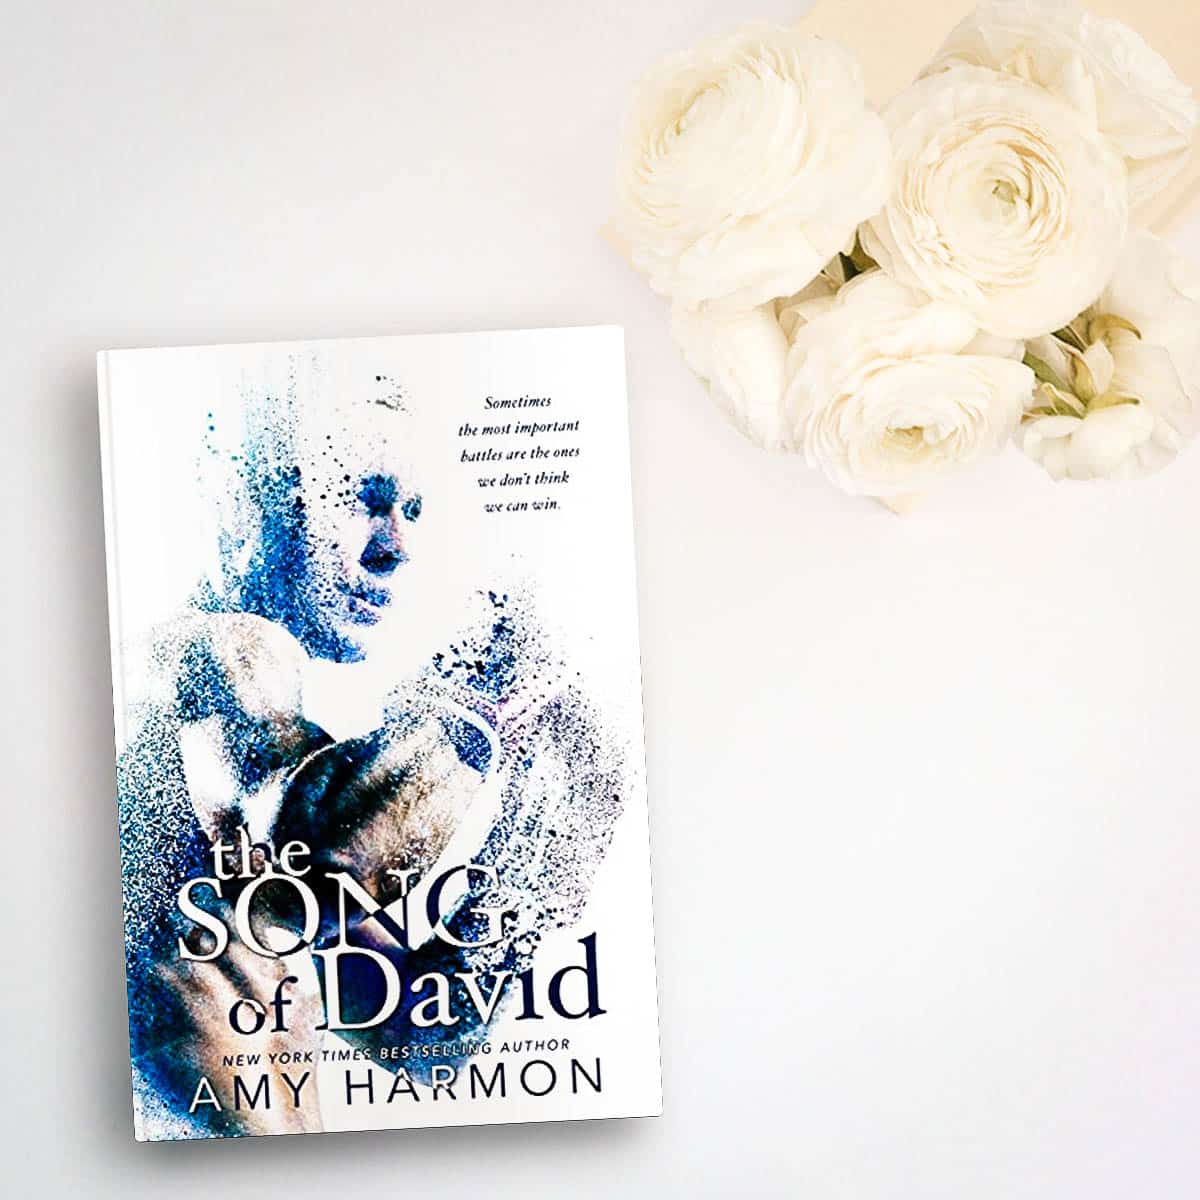 Meet Millie and David (Tag) in THE SONG OF DAVID by Amy Harmon, a stand-alone by Amy Harmon. Enjoy this snippet and music video and be sure to grab your copy!